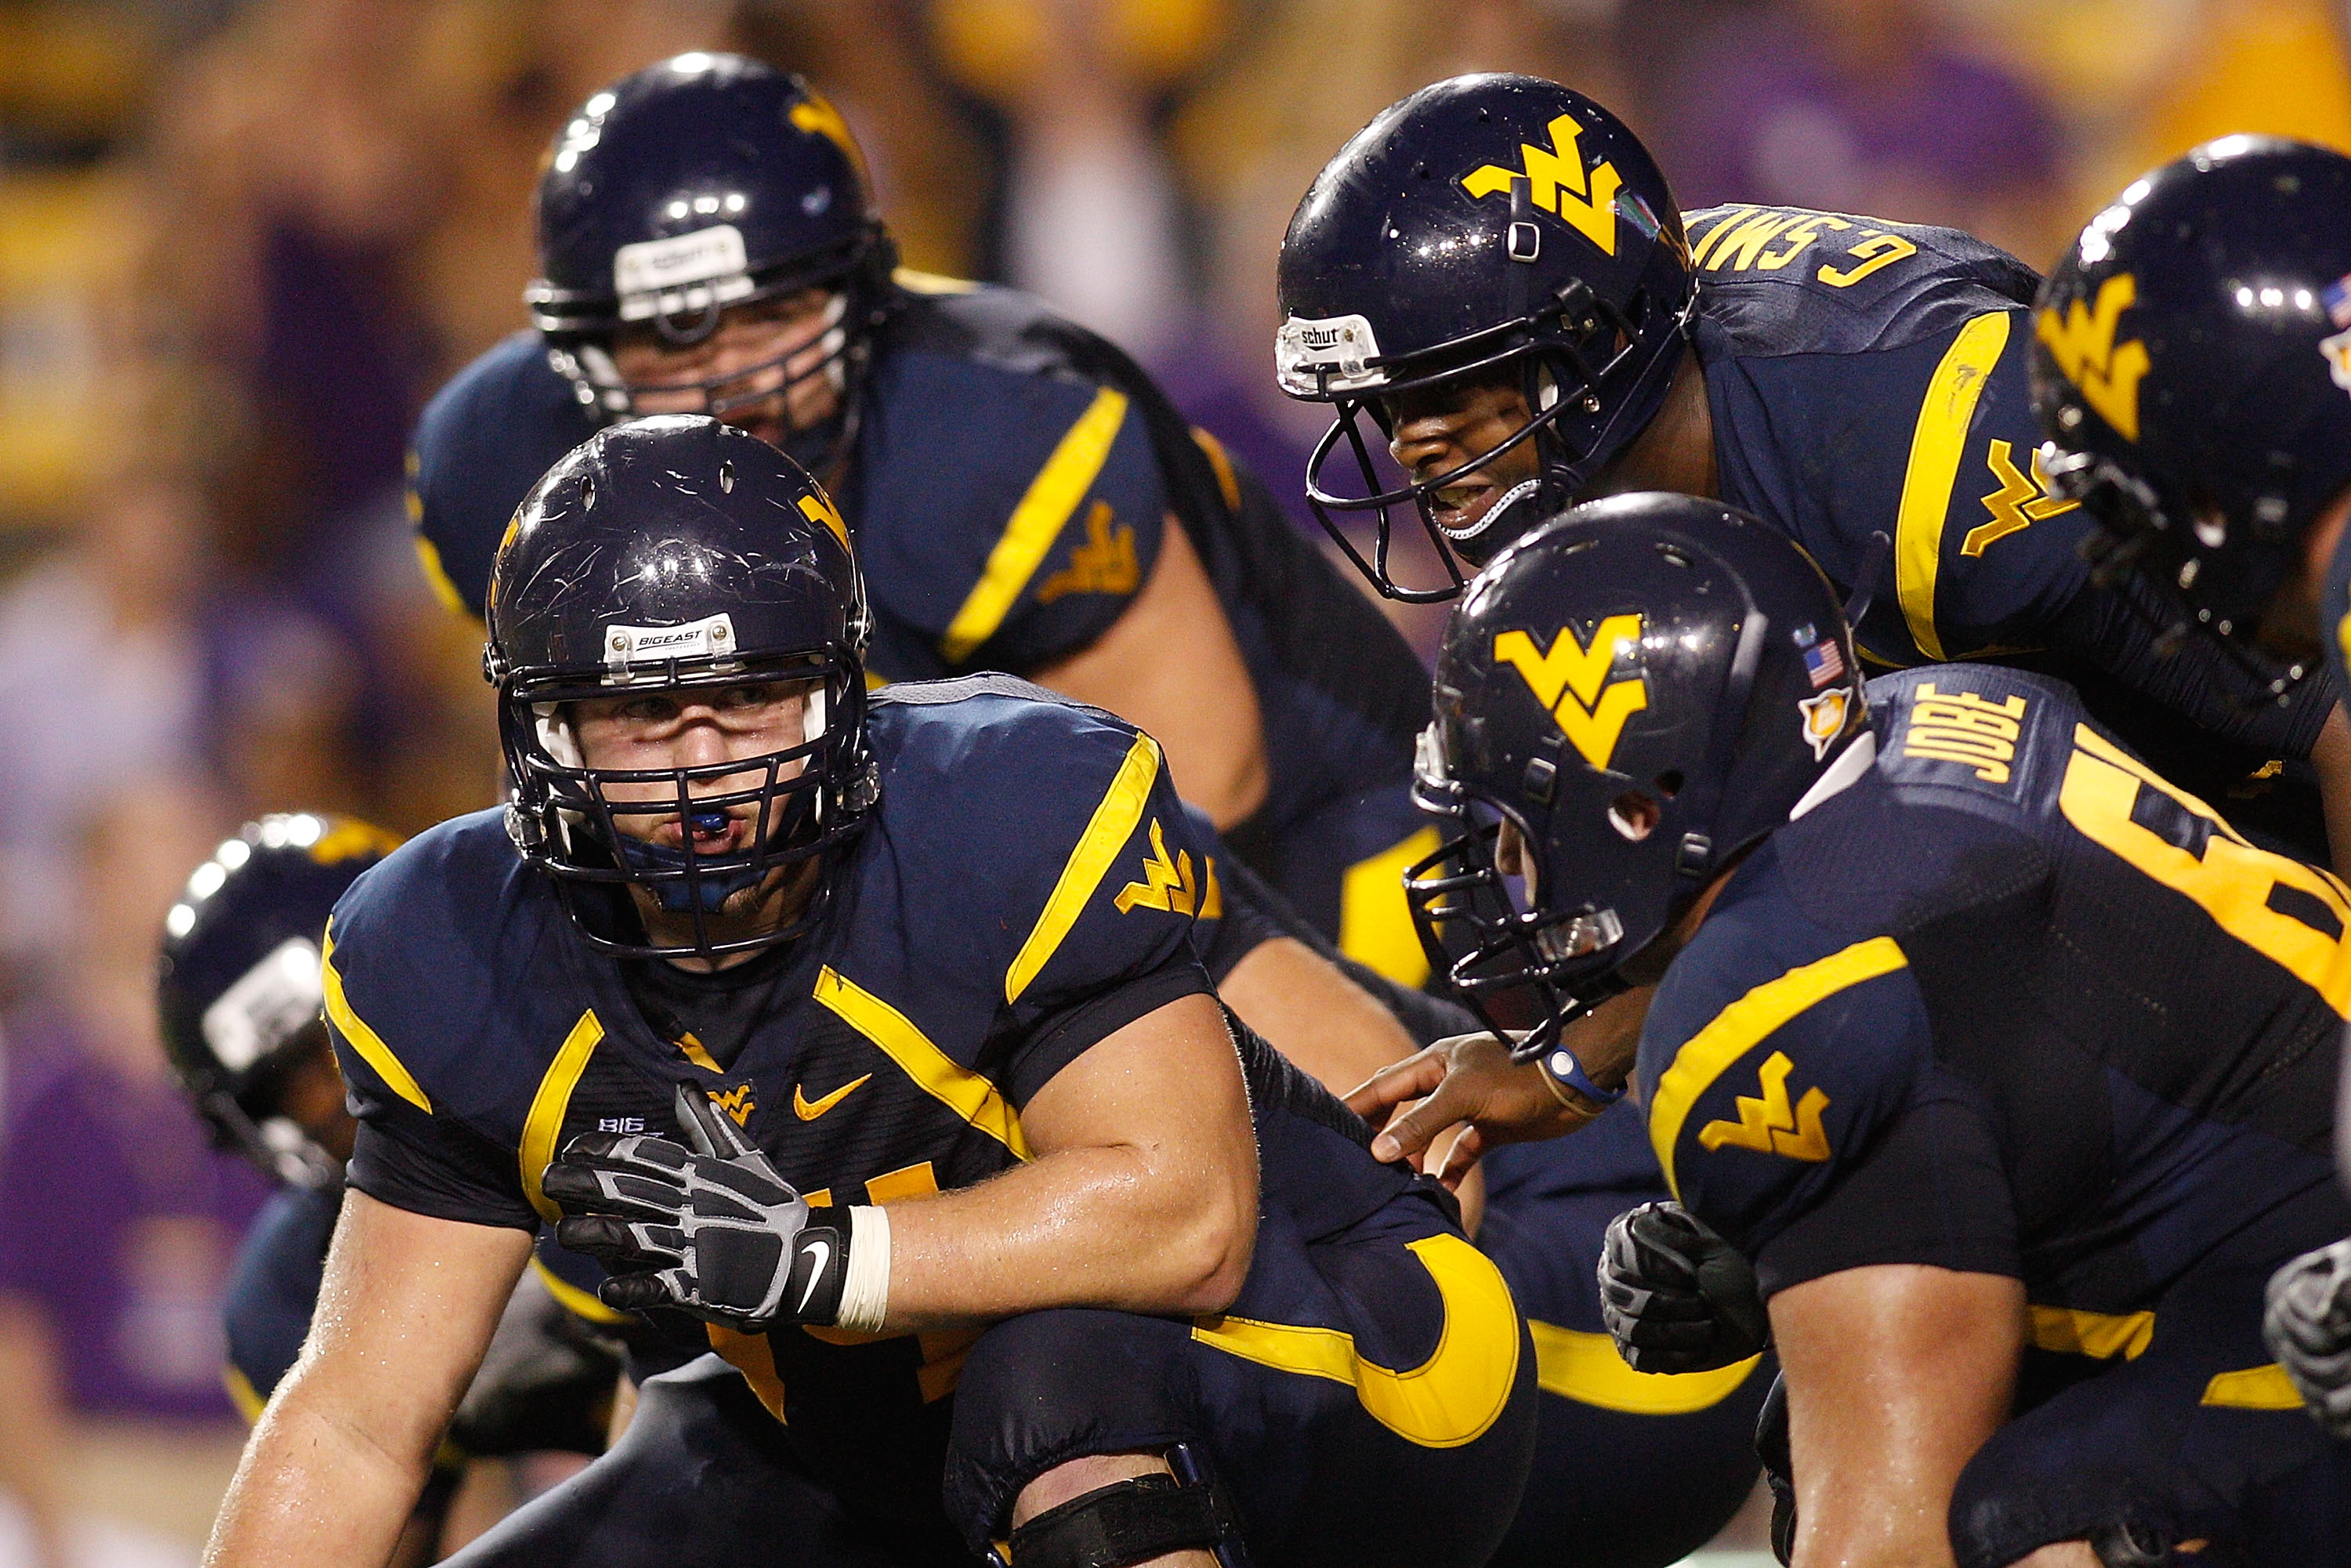 Top 10 Worst College Football Uniforms of All Time (Part 1) 